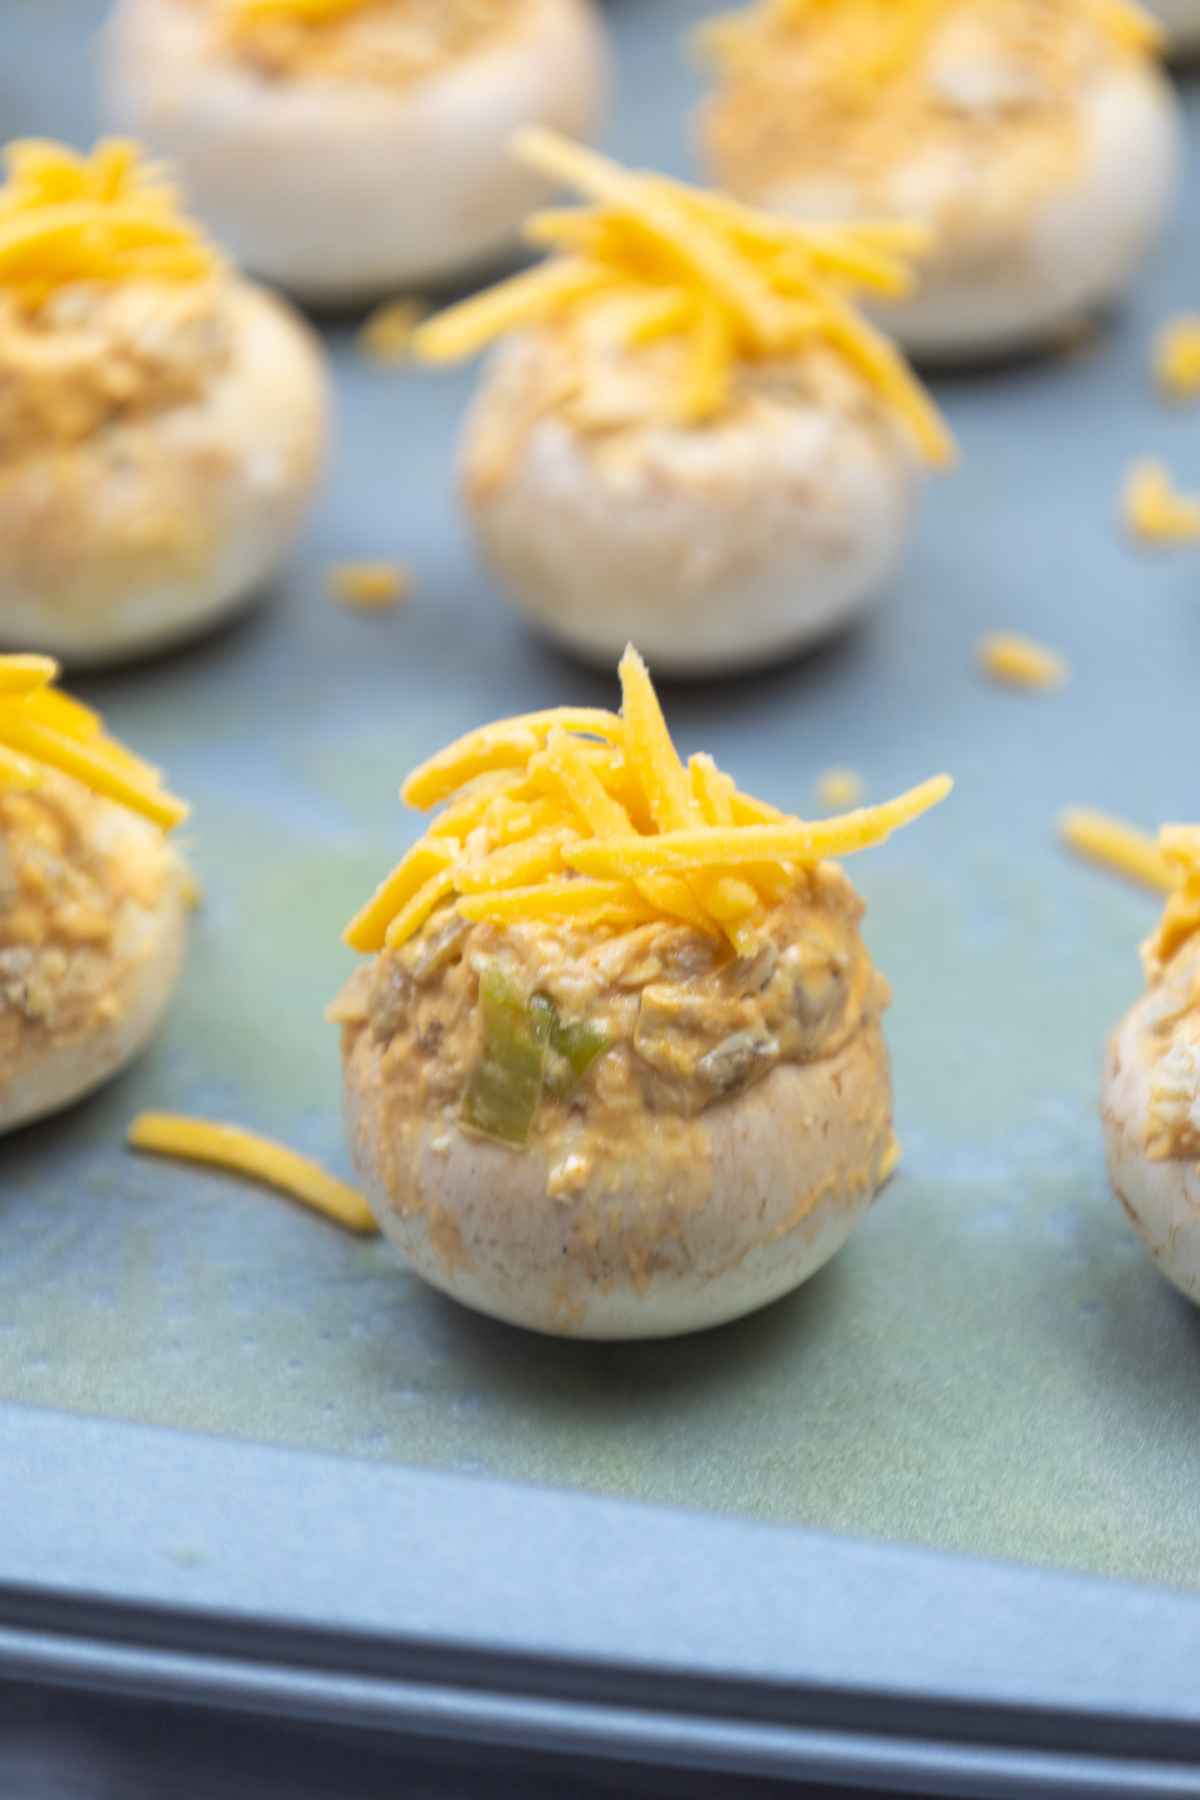 Image of an unbaked mushroom topped with cheese on the baking sheet.